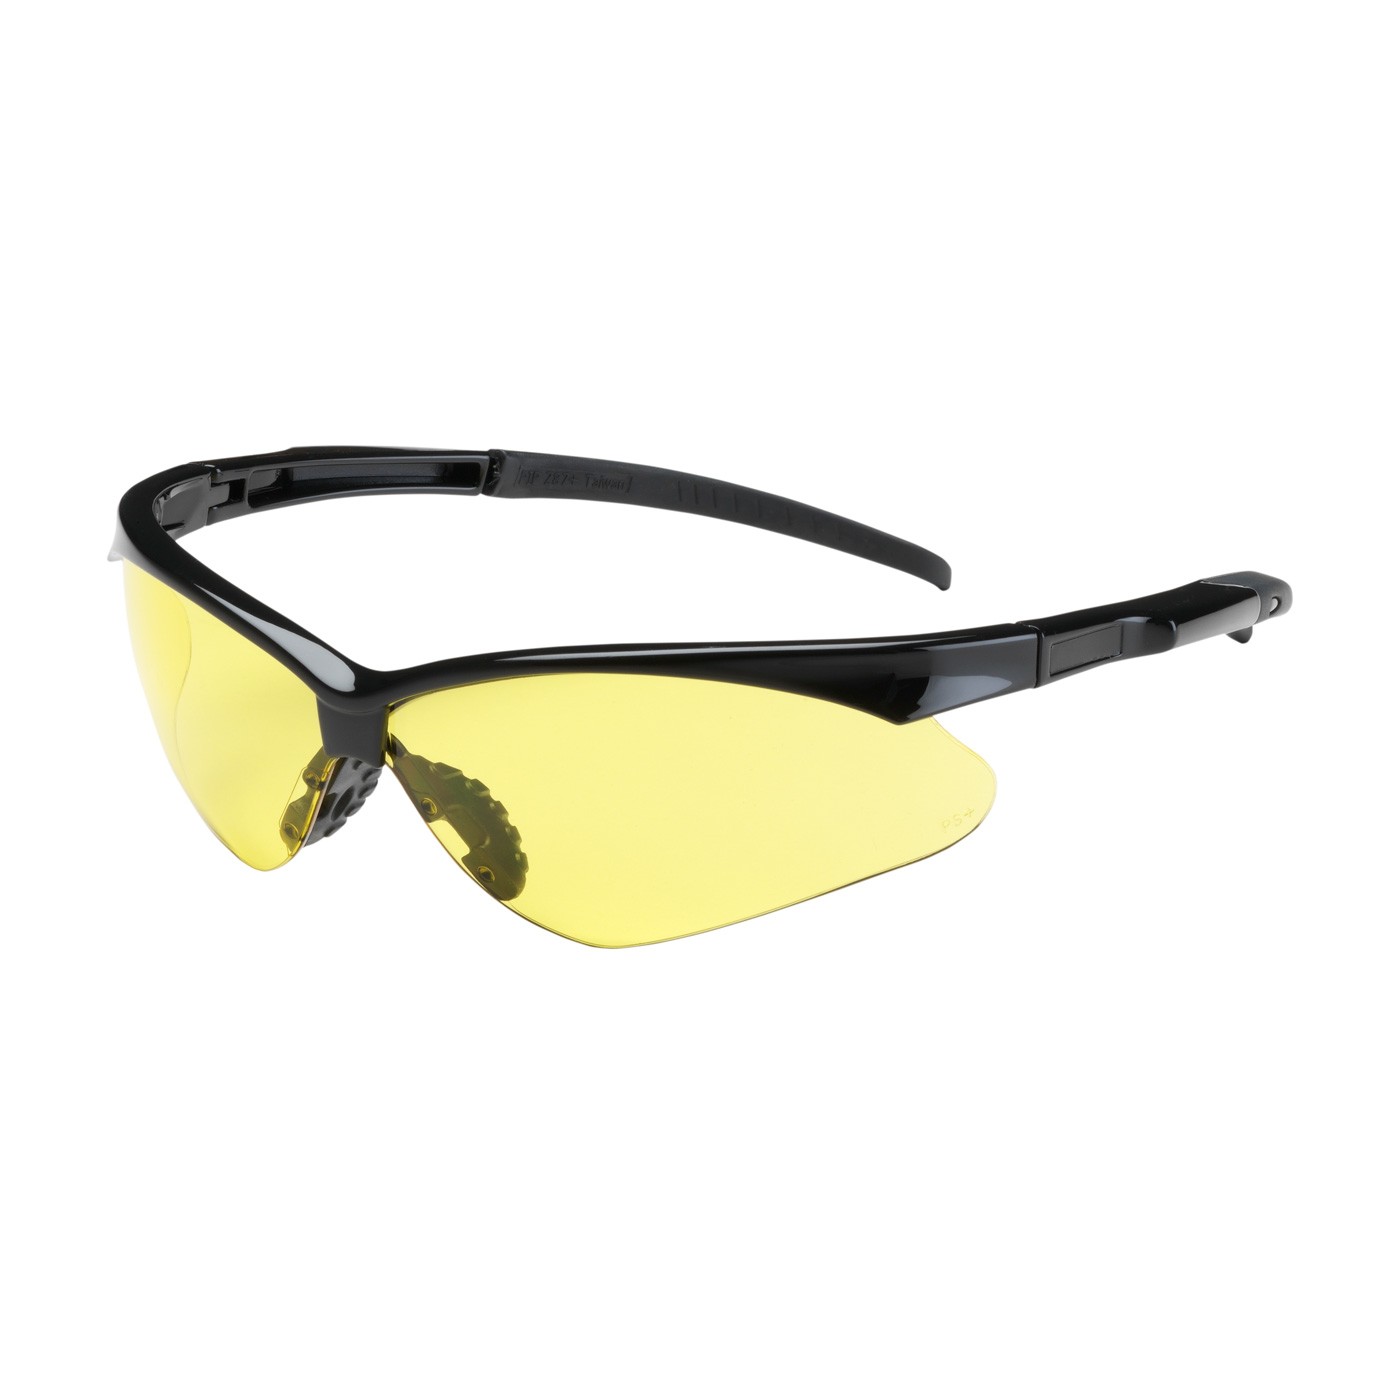  Adversary™ Semi-Rimless Safety Glasses with Black Frame, Amber Lens and Anti-Scratch Coating  (#250-28-0009)